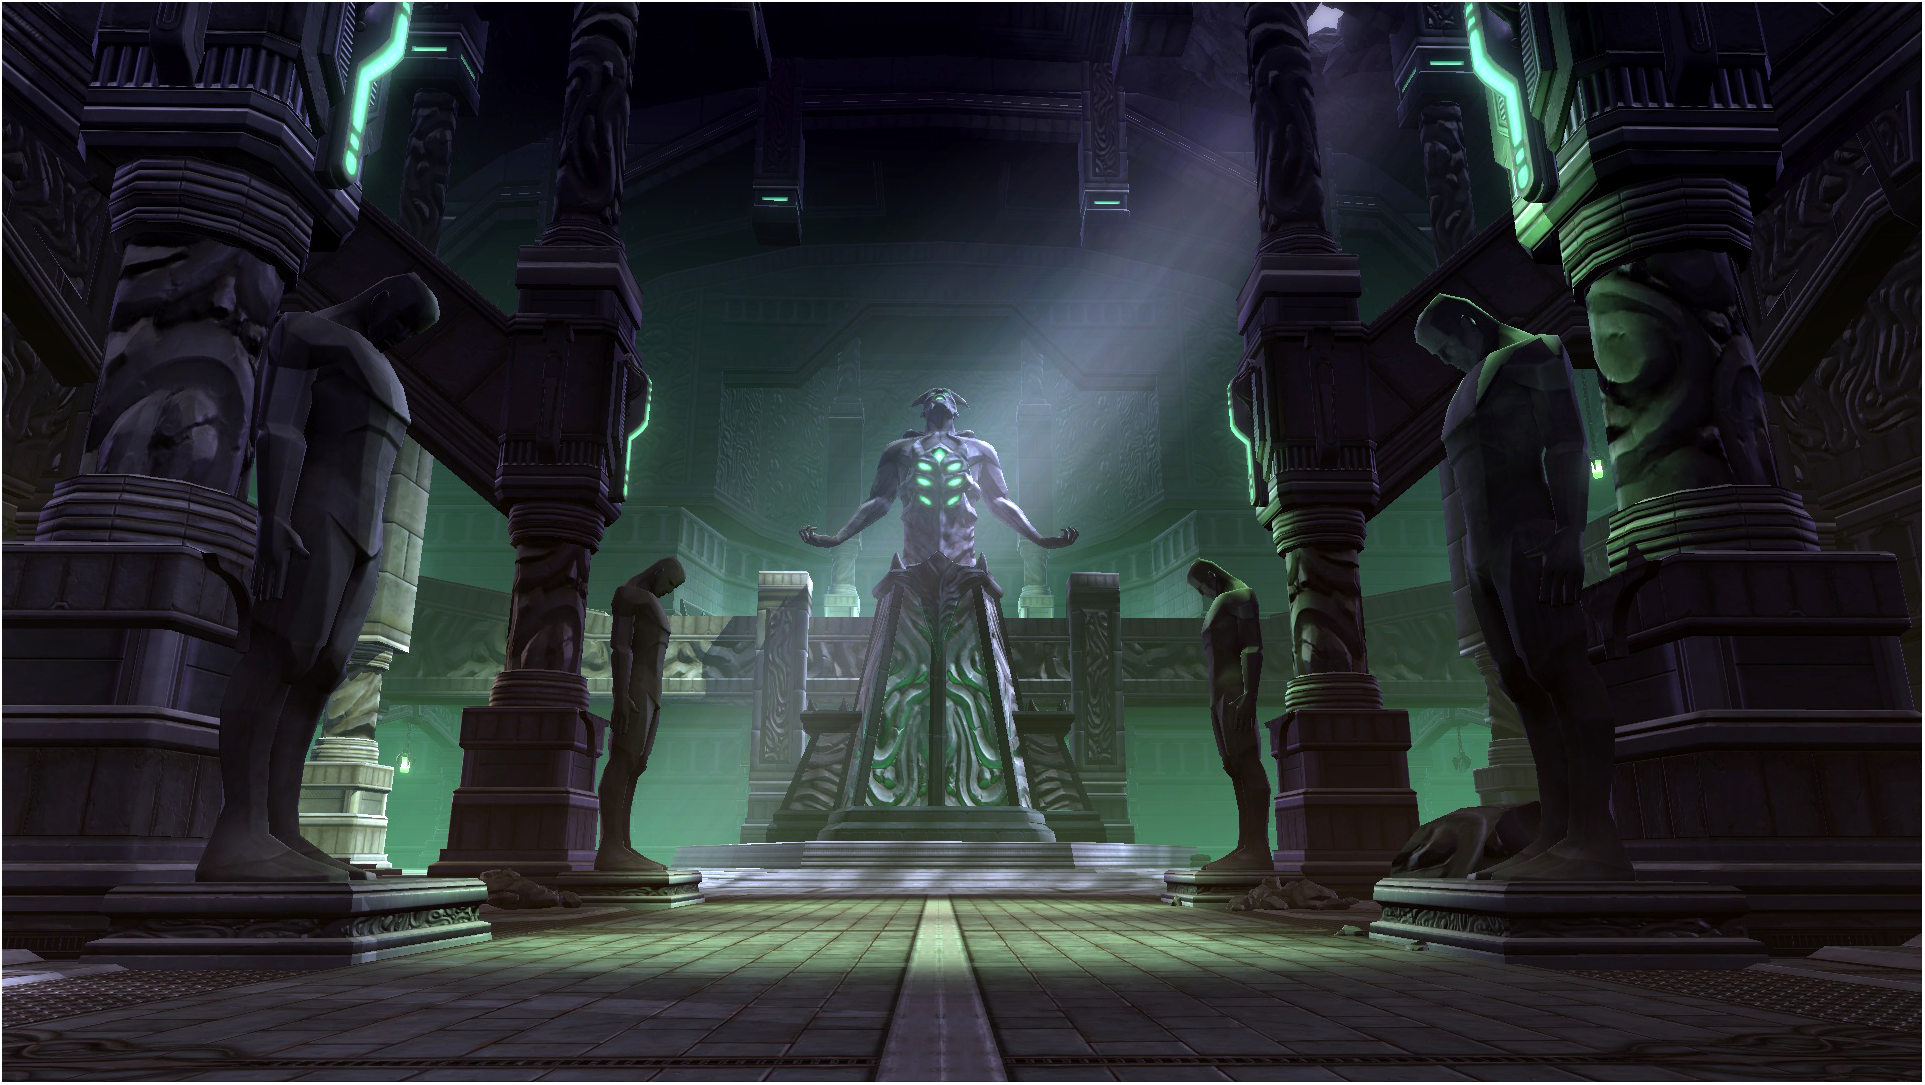 New Screenshot From Swtor Location A Sith Temple In Kaas City